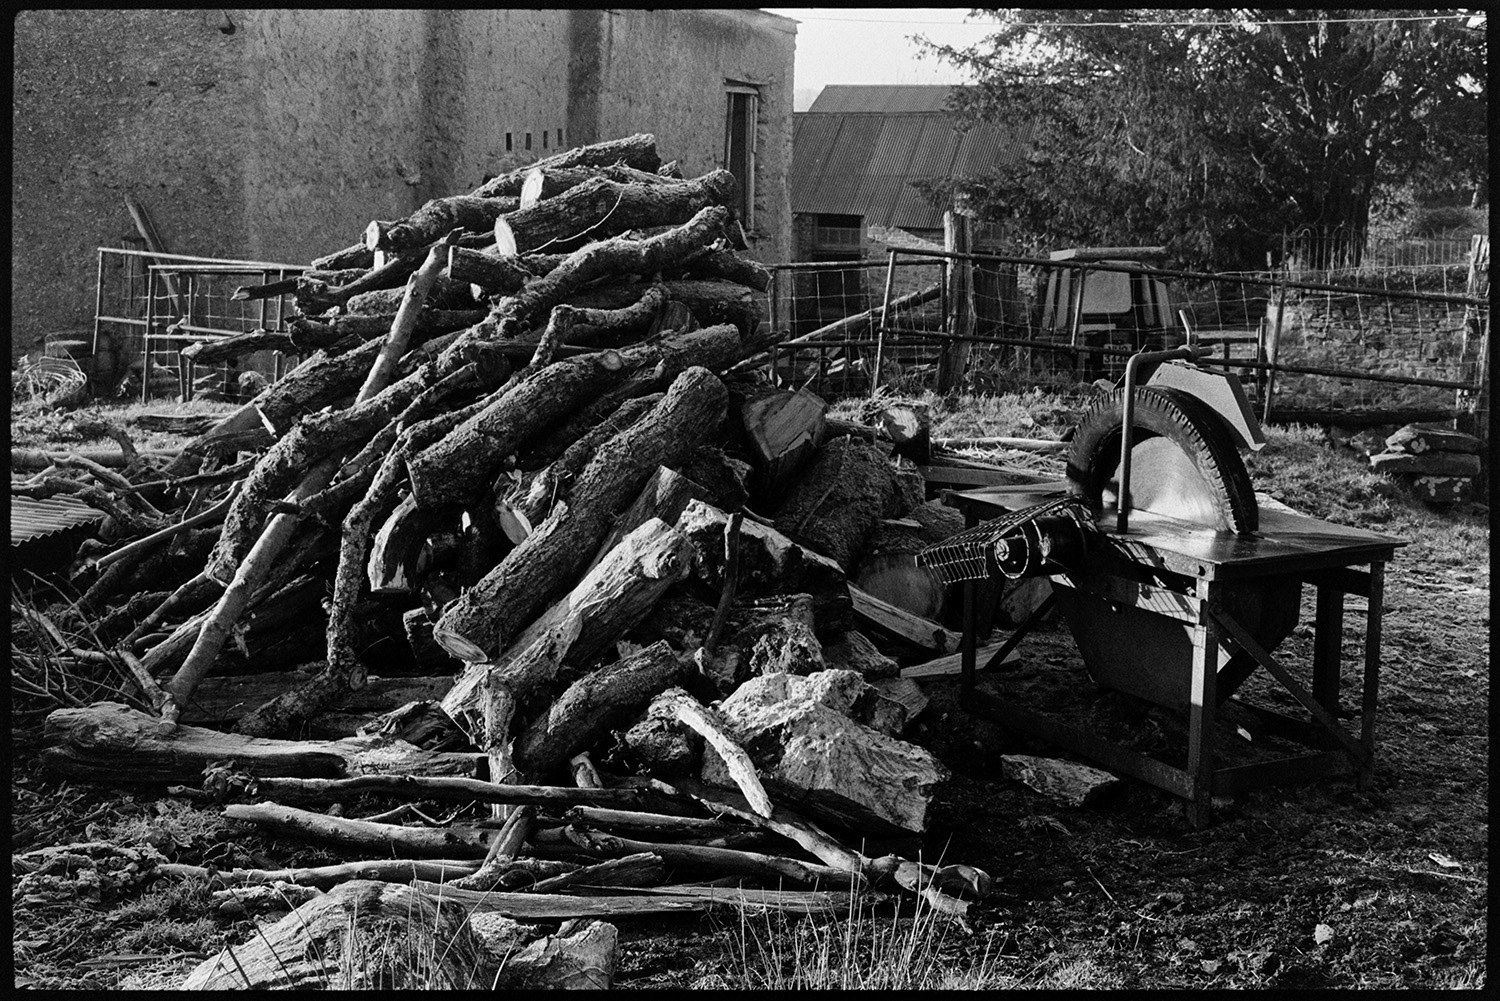 Sawmill and woodpile in yard.
[A woodpile and circular saw bench in the farmyard at Lower Langham, Dolton. The blade of the saw is covered with an old tyre. A tractor and farm buildings are visible in the background.]